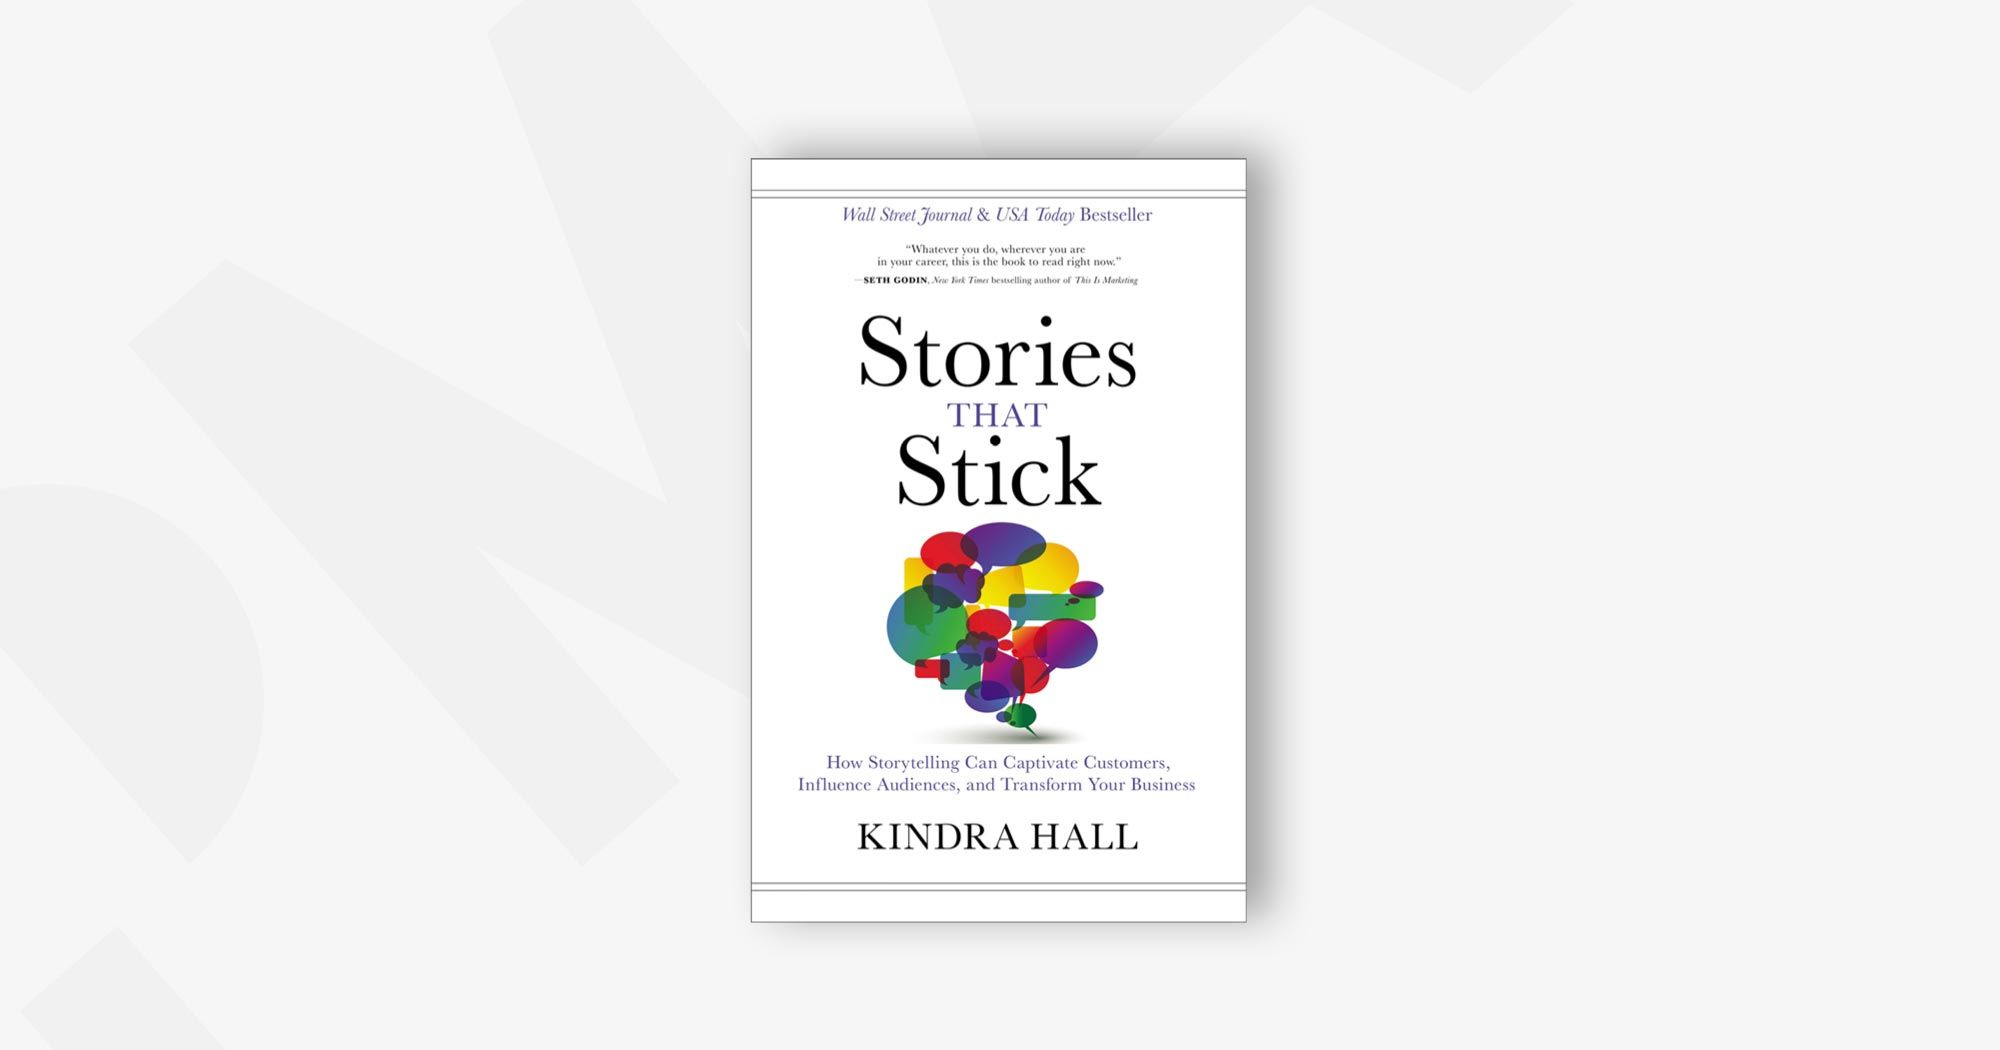 Stories That Stick: How Storytelling Can Captivate Customers, Influence Audiences, and Transform Your Business – Kindra Hall